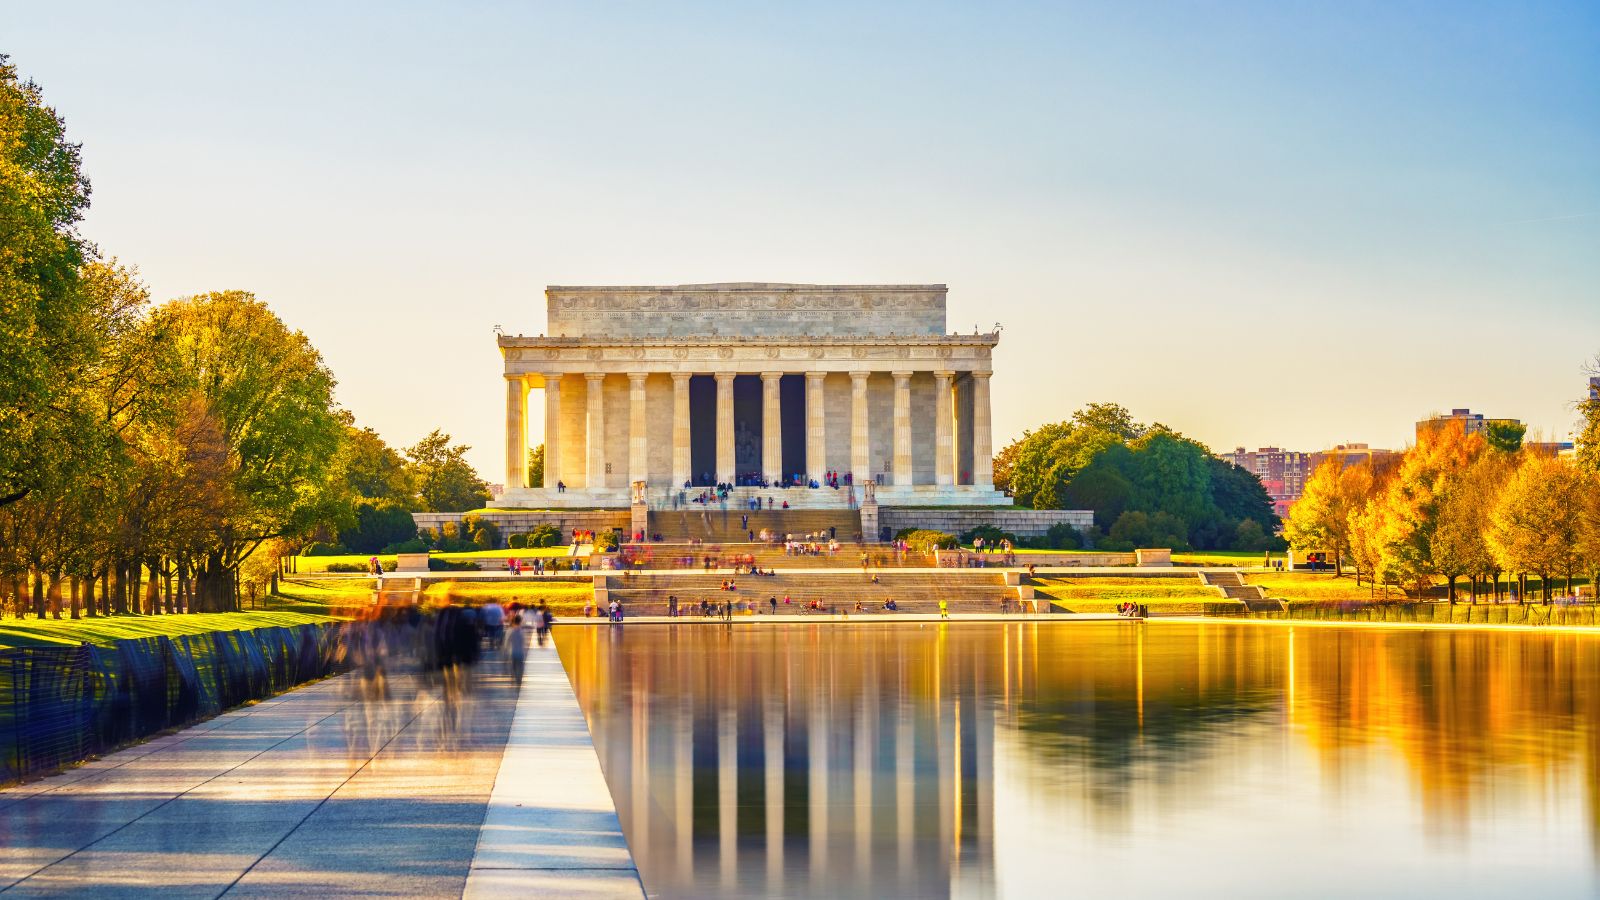 <p>Recommended by 67% of visitors</p><p>The Lincoln Memorial, a tribute to President Abraham Lincoln, is an iconic landmark in Washington, DC. Since its opening in 1922, it has been the backdrop for historic events, including Dr. Martin Luther King Jr.’s “I Have a Dream” speech. Designed by Henry Bacon in a style akin to a Greek temple, it features a 19-foot marble statue of Lincoln and inscriptions of his Gettysburg Address and Second Inaugural Address. This neoclassical monument, symbolizing Lincoln’s fight to preserve the nation during the Civil War, is a must-visit for its historical significance and architectural grandeur.</p>